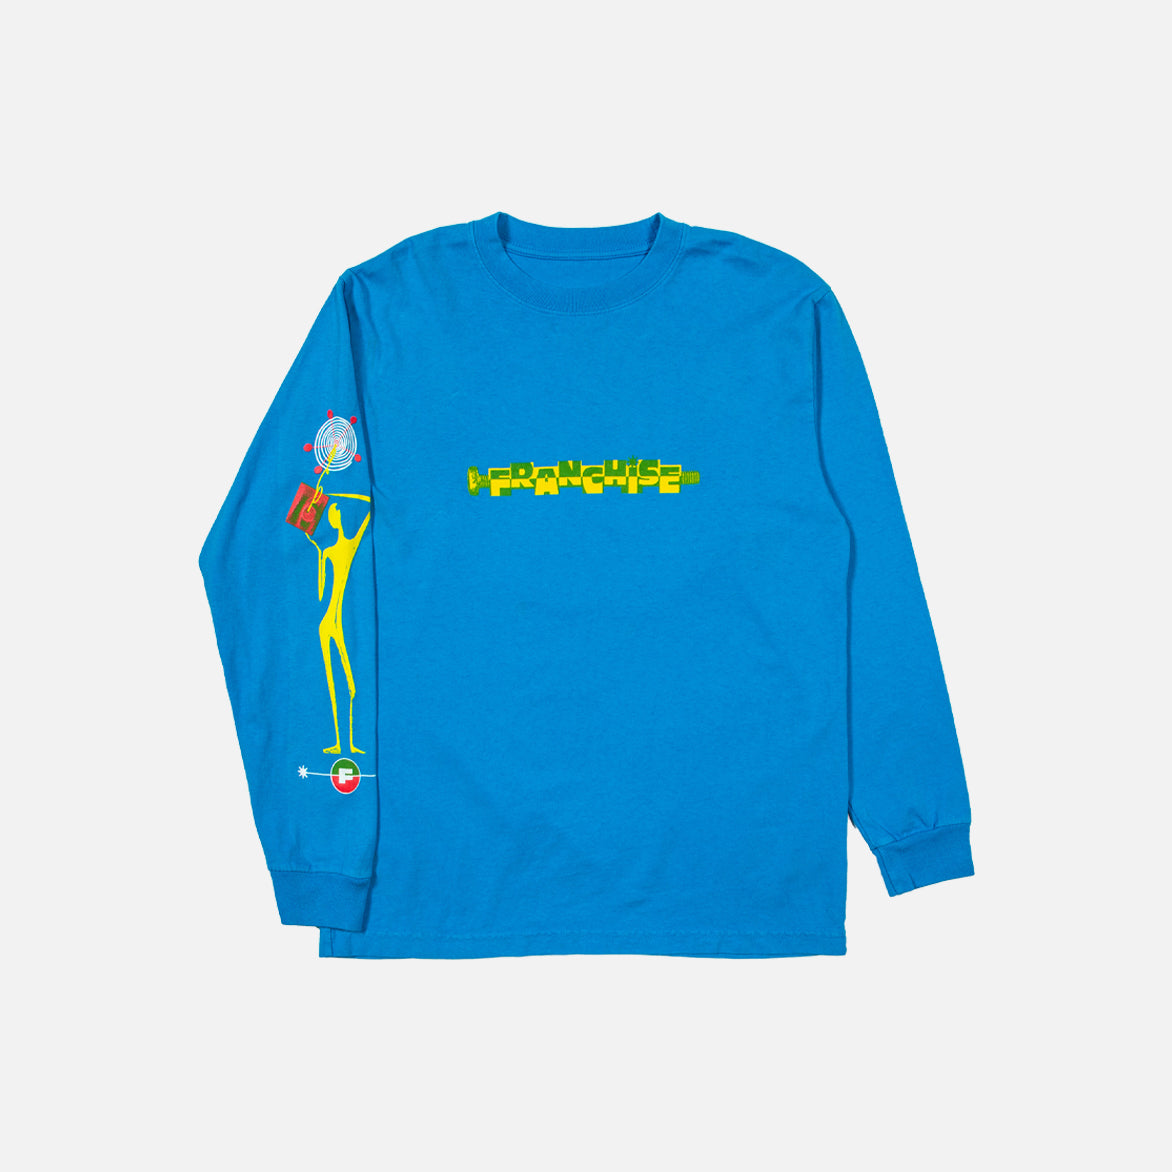 WITHIN YOURSELF LS TEE - ELECTRIC BLUE